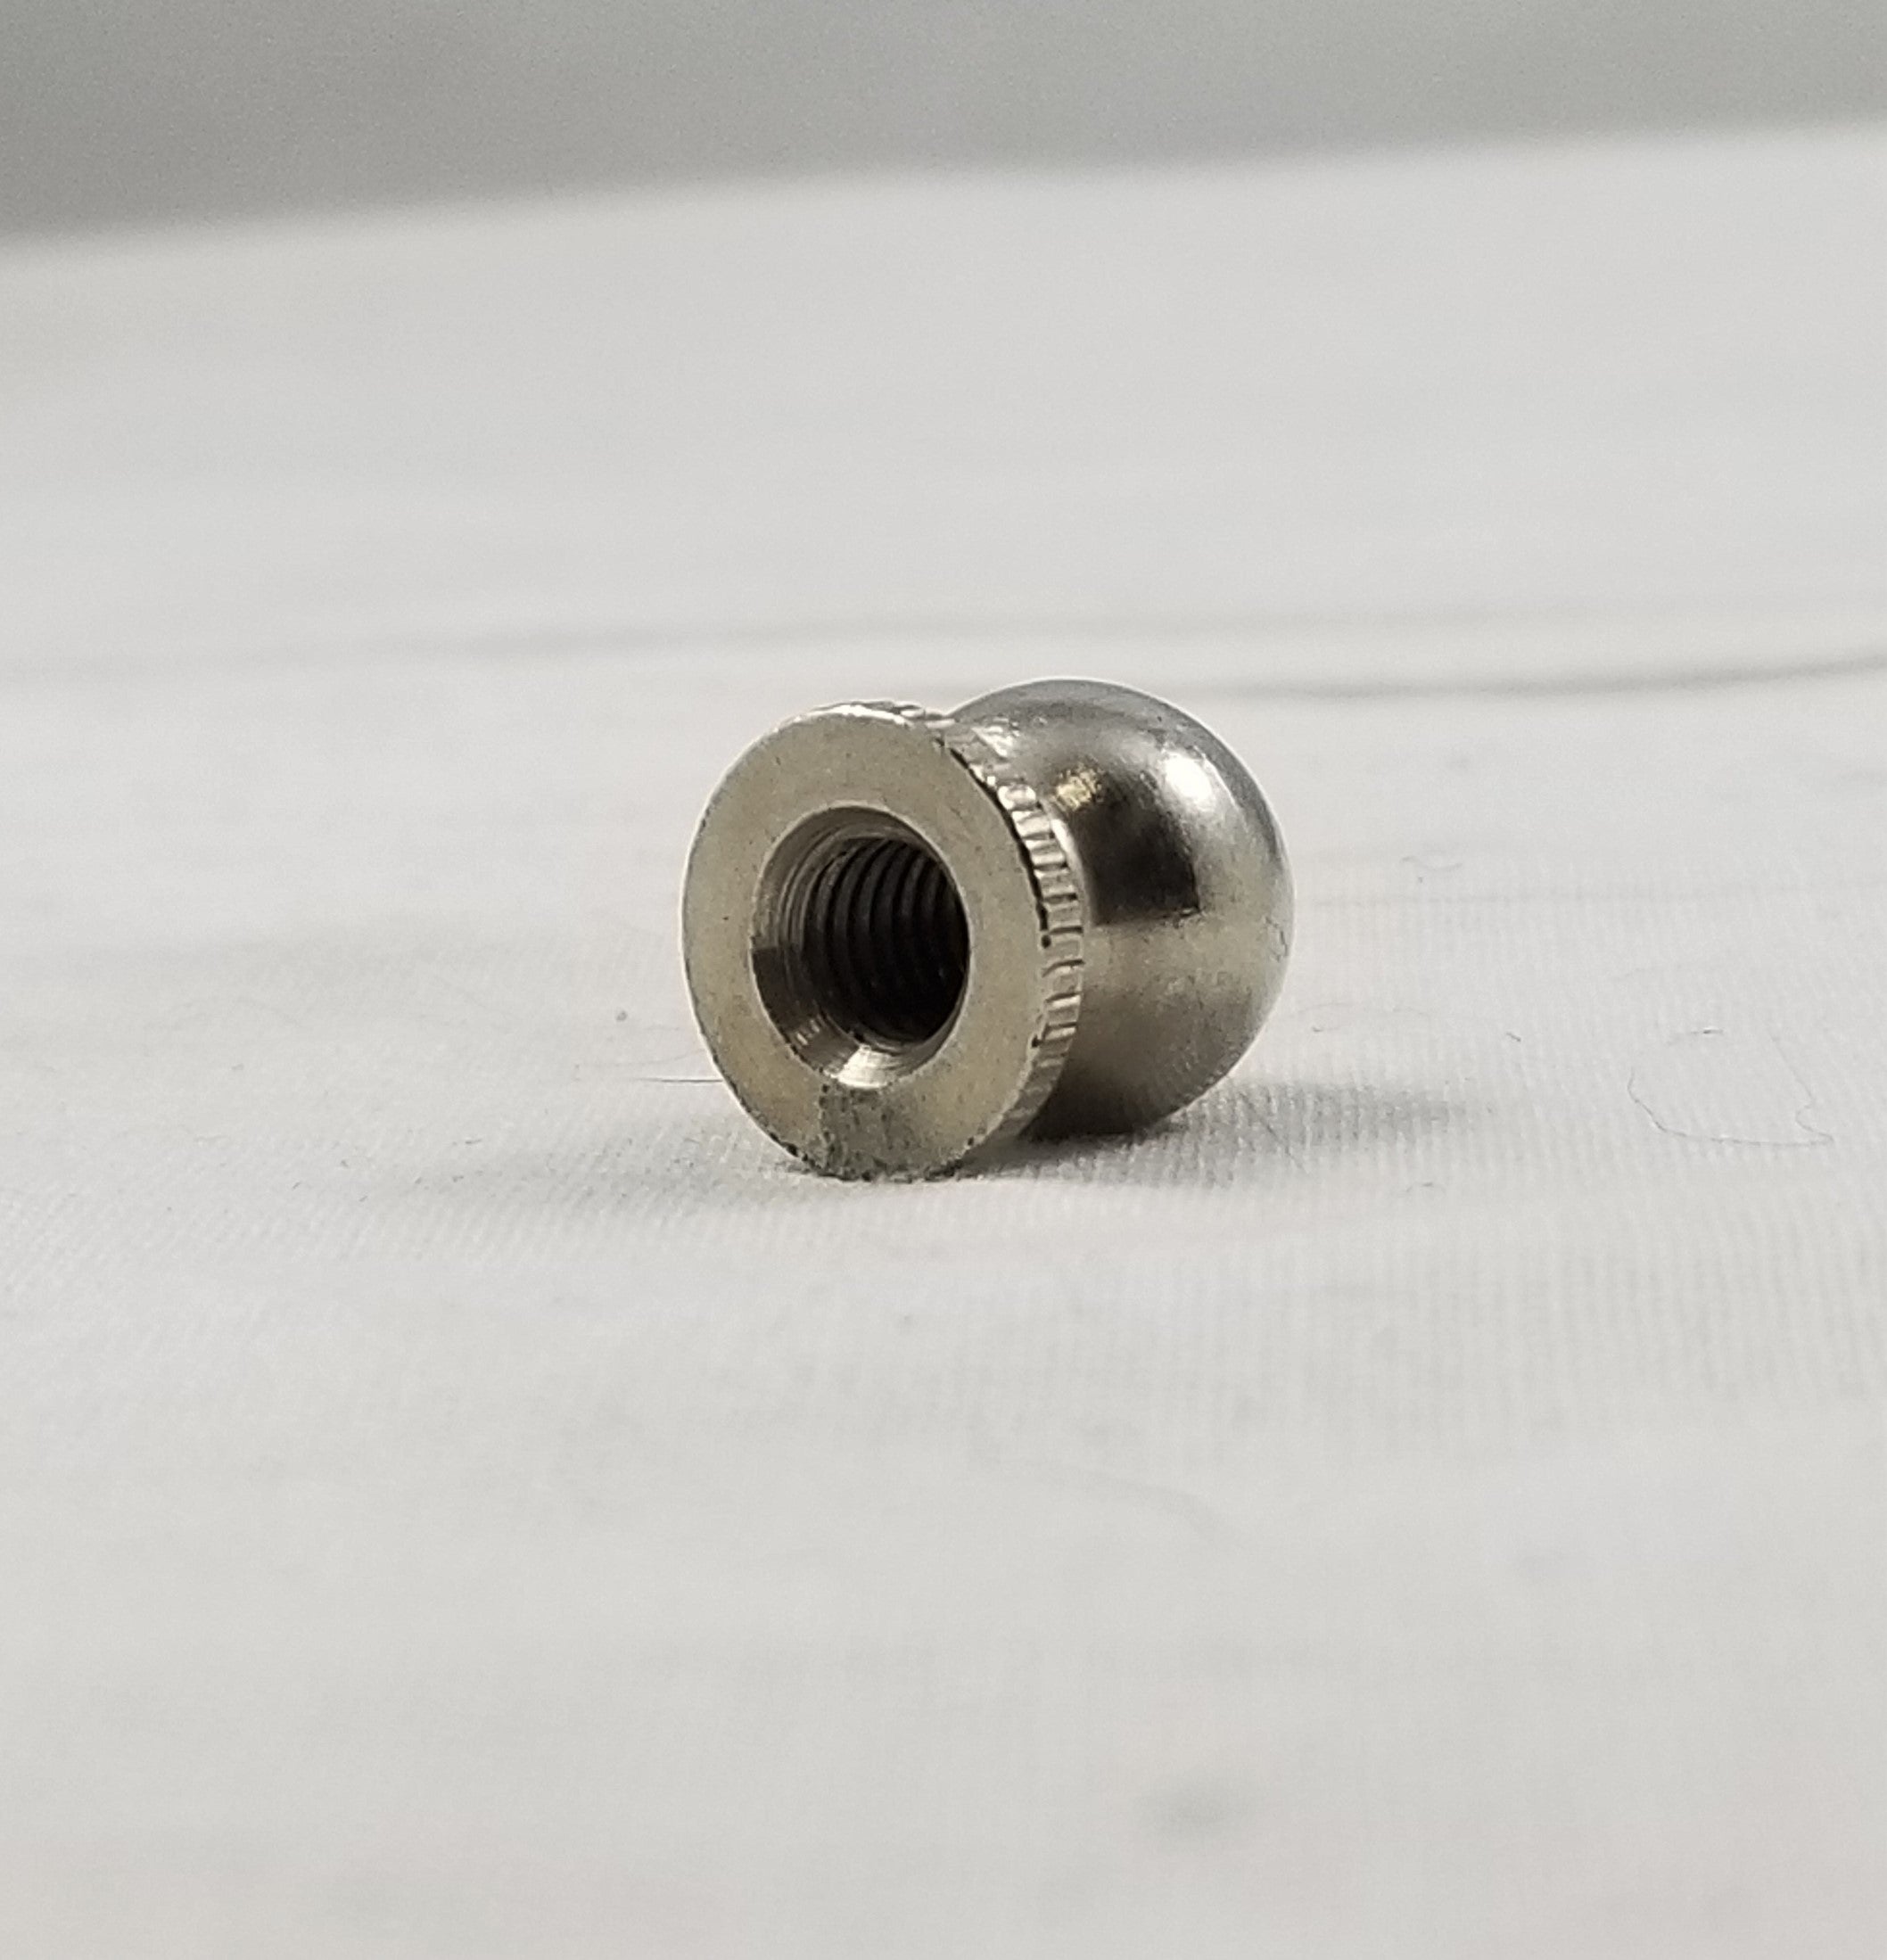 Nickel Plated Finial or Knob - Tapped 1/4"-27